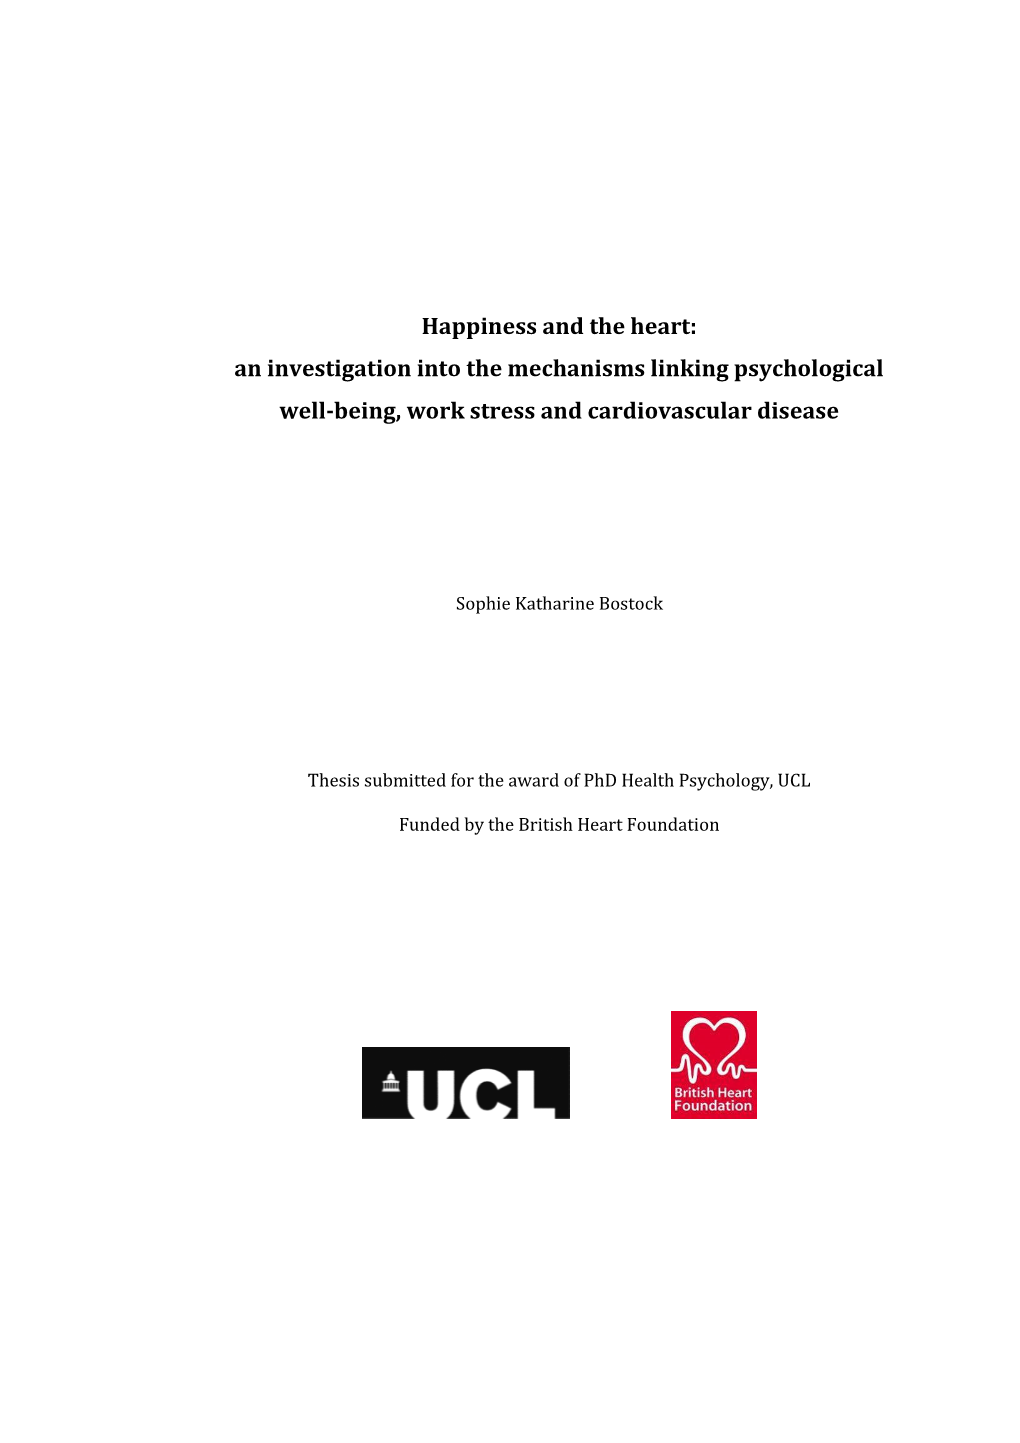 Happiness and the Heart: an Investigation Into the Mechanisms Linking Psychological Well-Being, Work Stress and Cardiovascular Disease